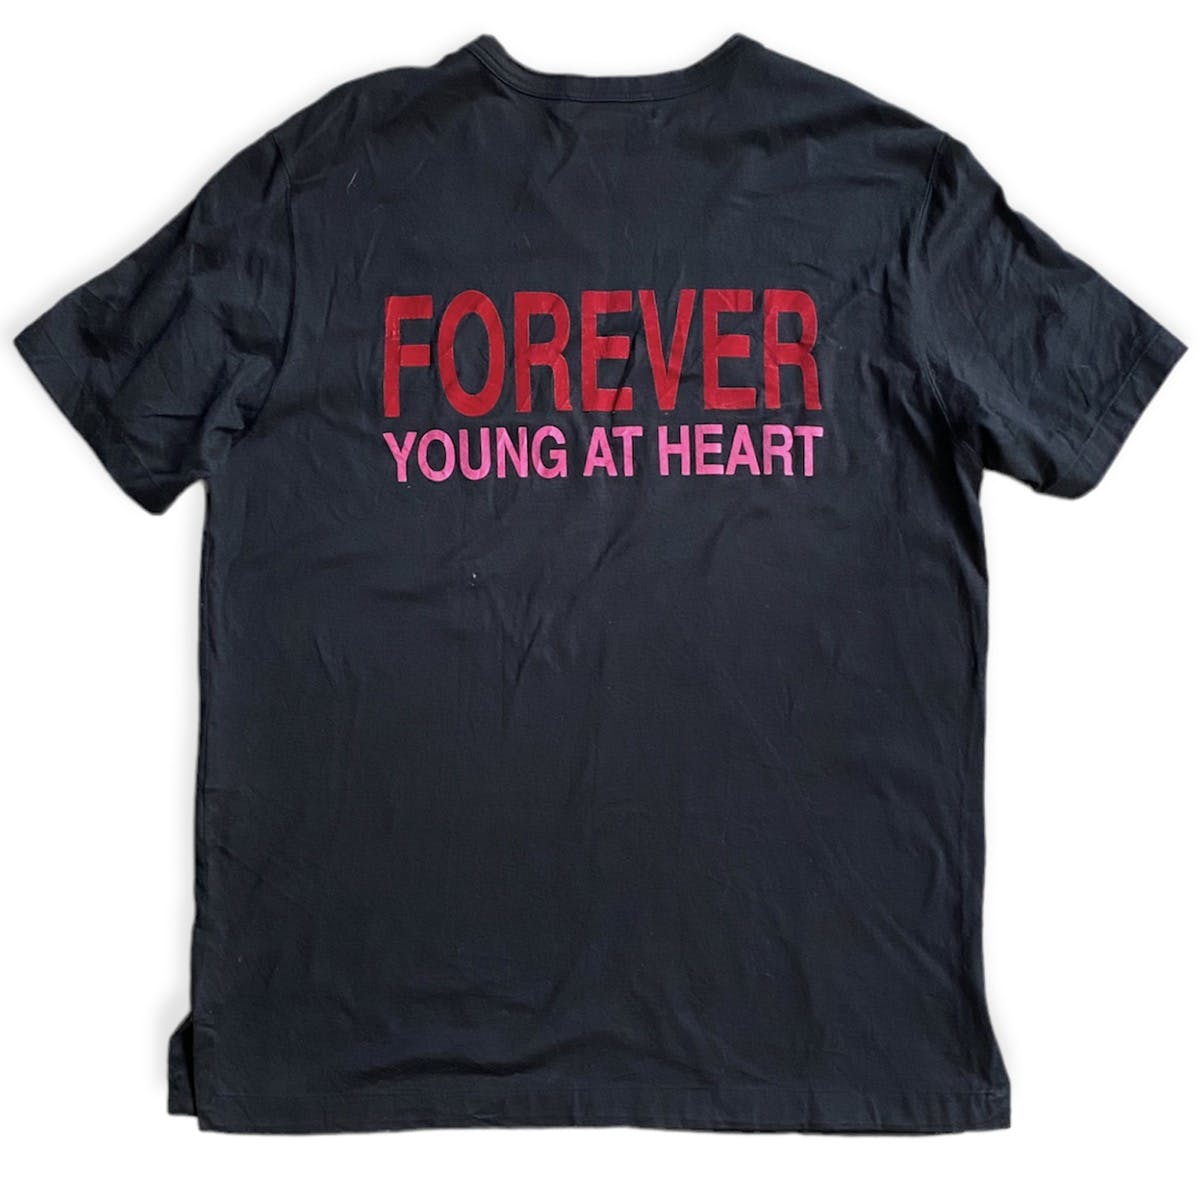 Mastermind Japan X Forever Young At Heart - 2